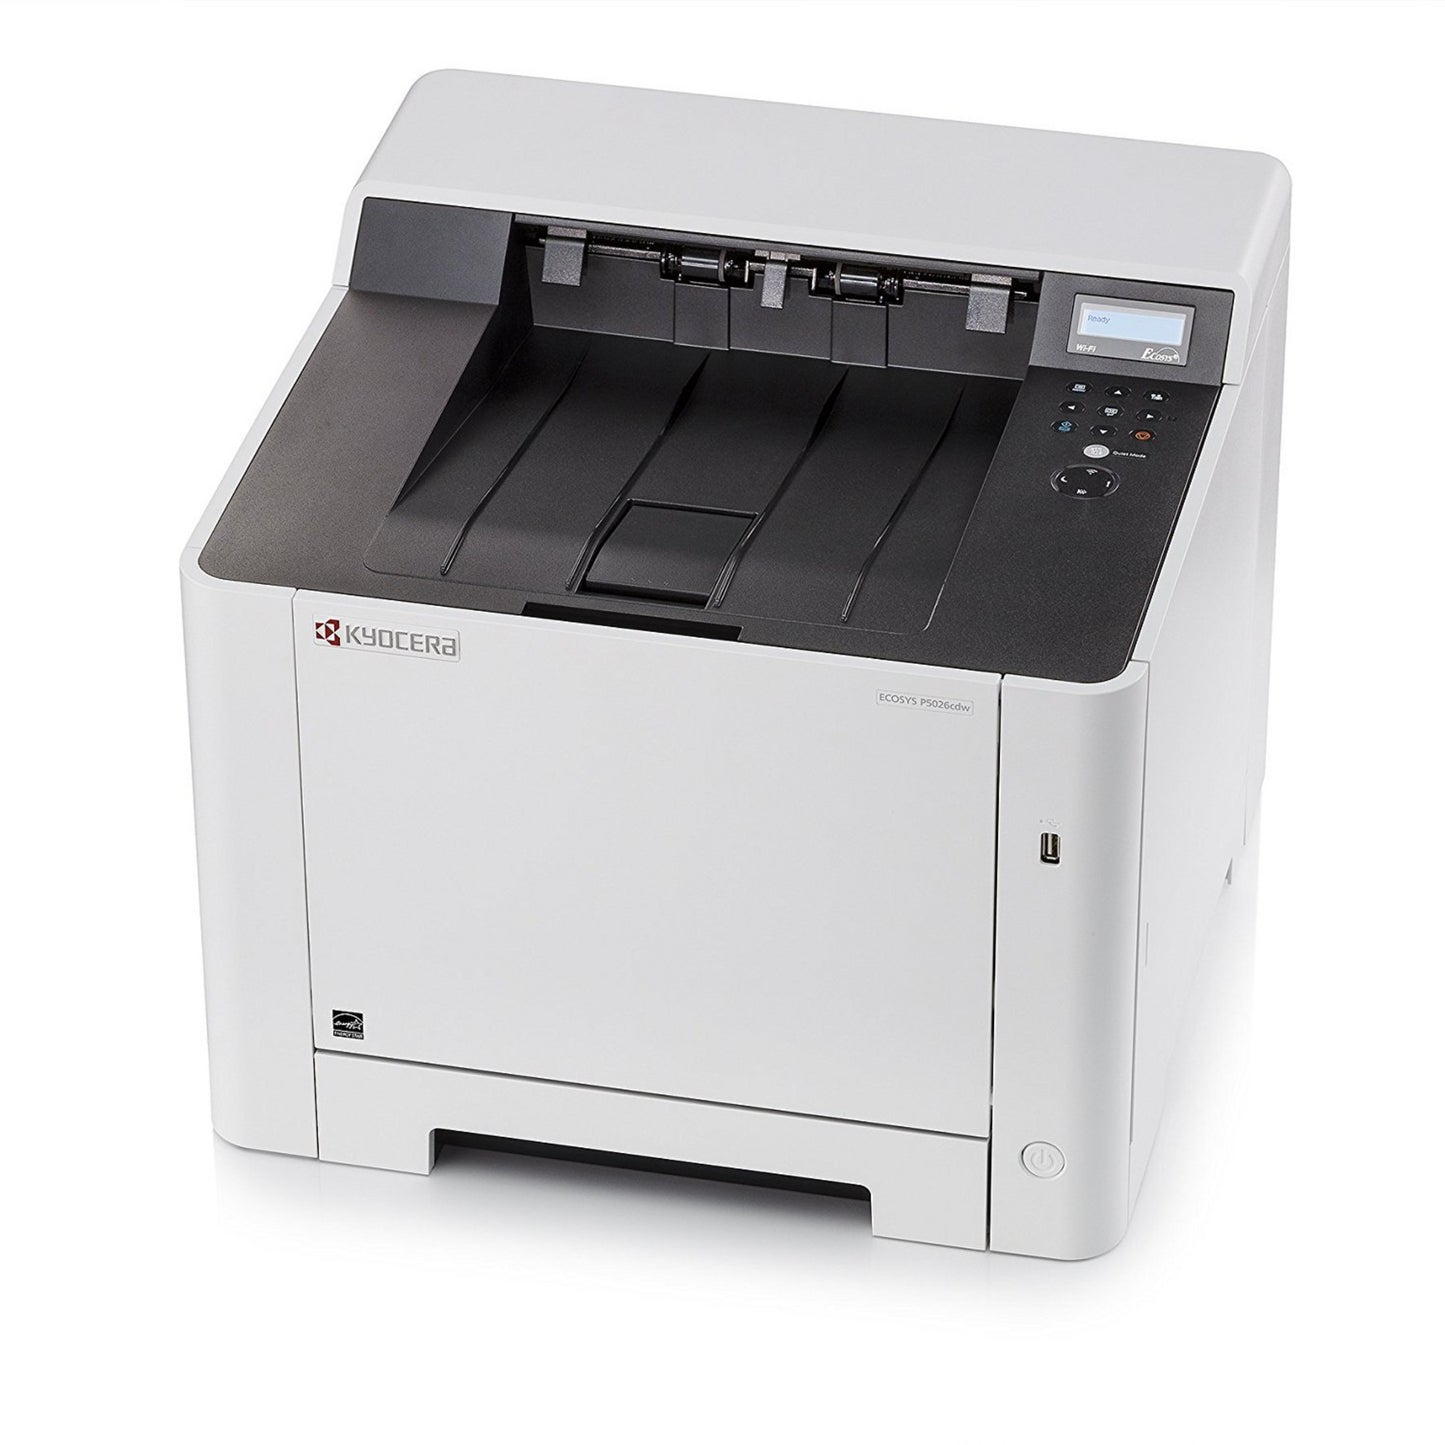 New Kyocera ECOSYS P5026CDW COLOR PRINTER Color 27 ppm, Wireless - SOP-TECHNOLOGIES, INC.